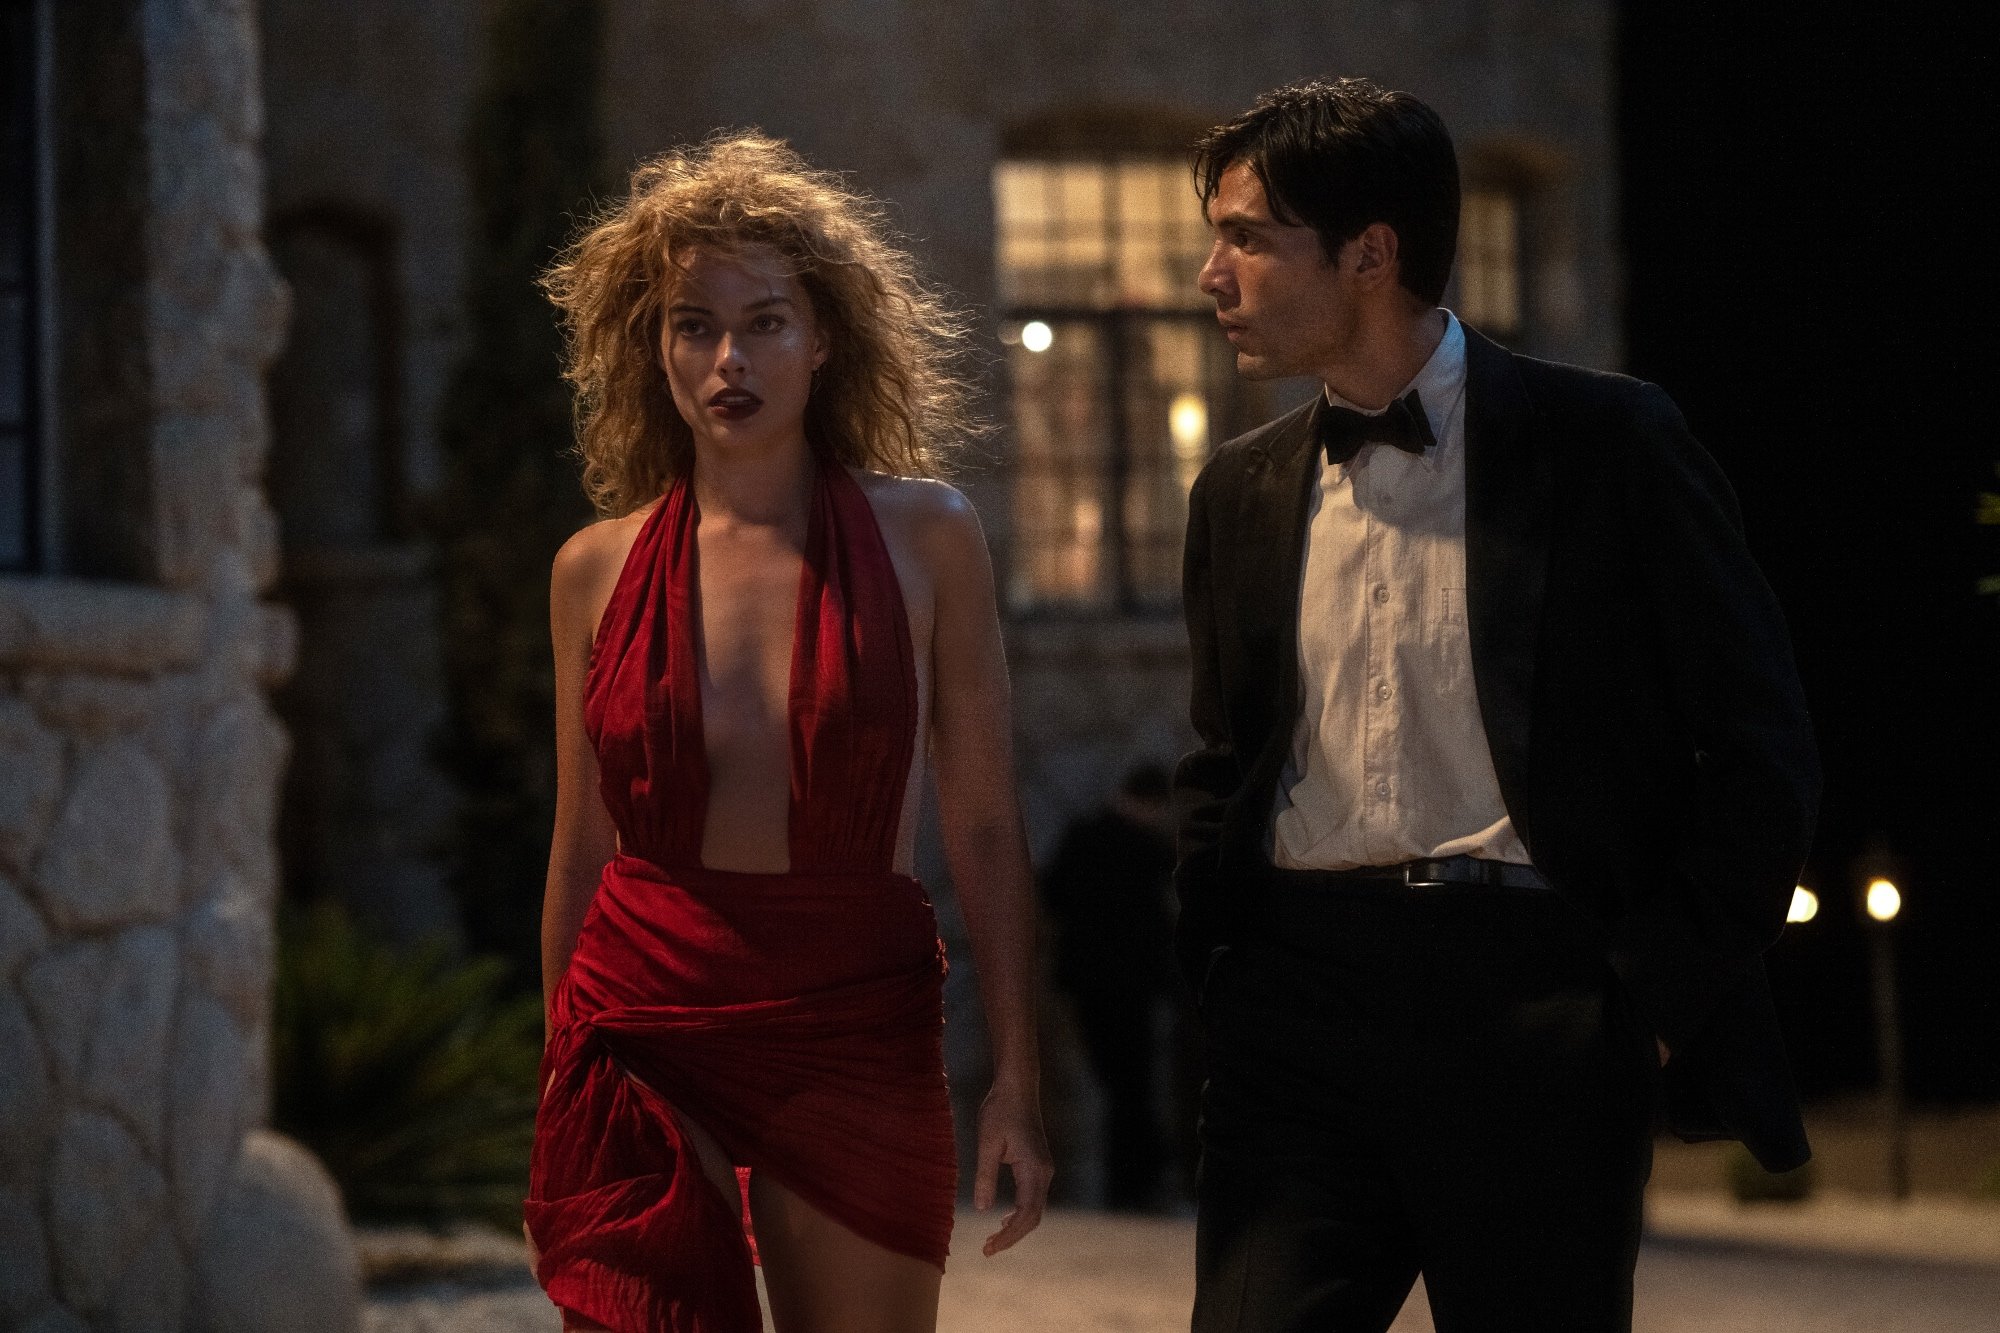 'Babylon' Margot Robbie as Nellie LaRoy and Diego Calva as Manny Torres walking outside of a house. She's wearing a red dress and he's wearing a black and white tux.